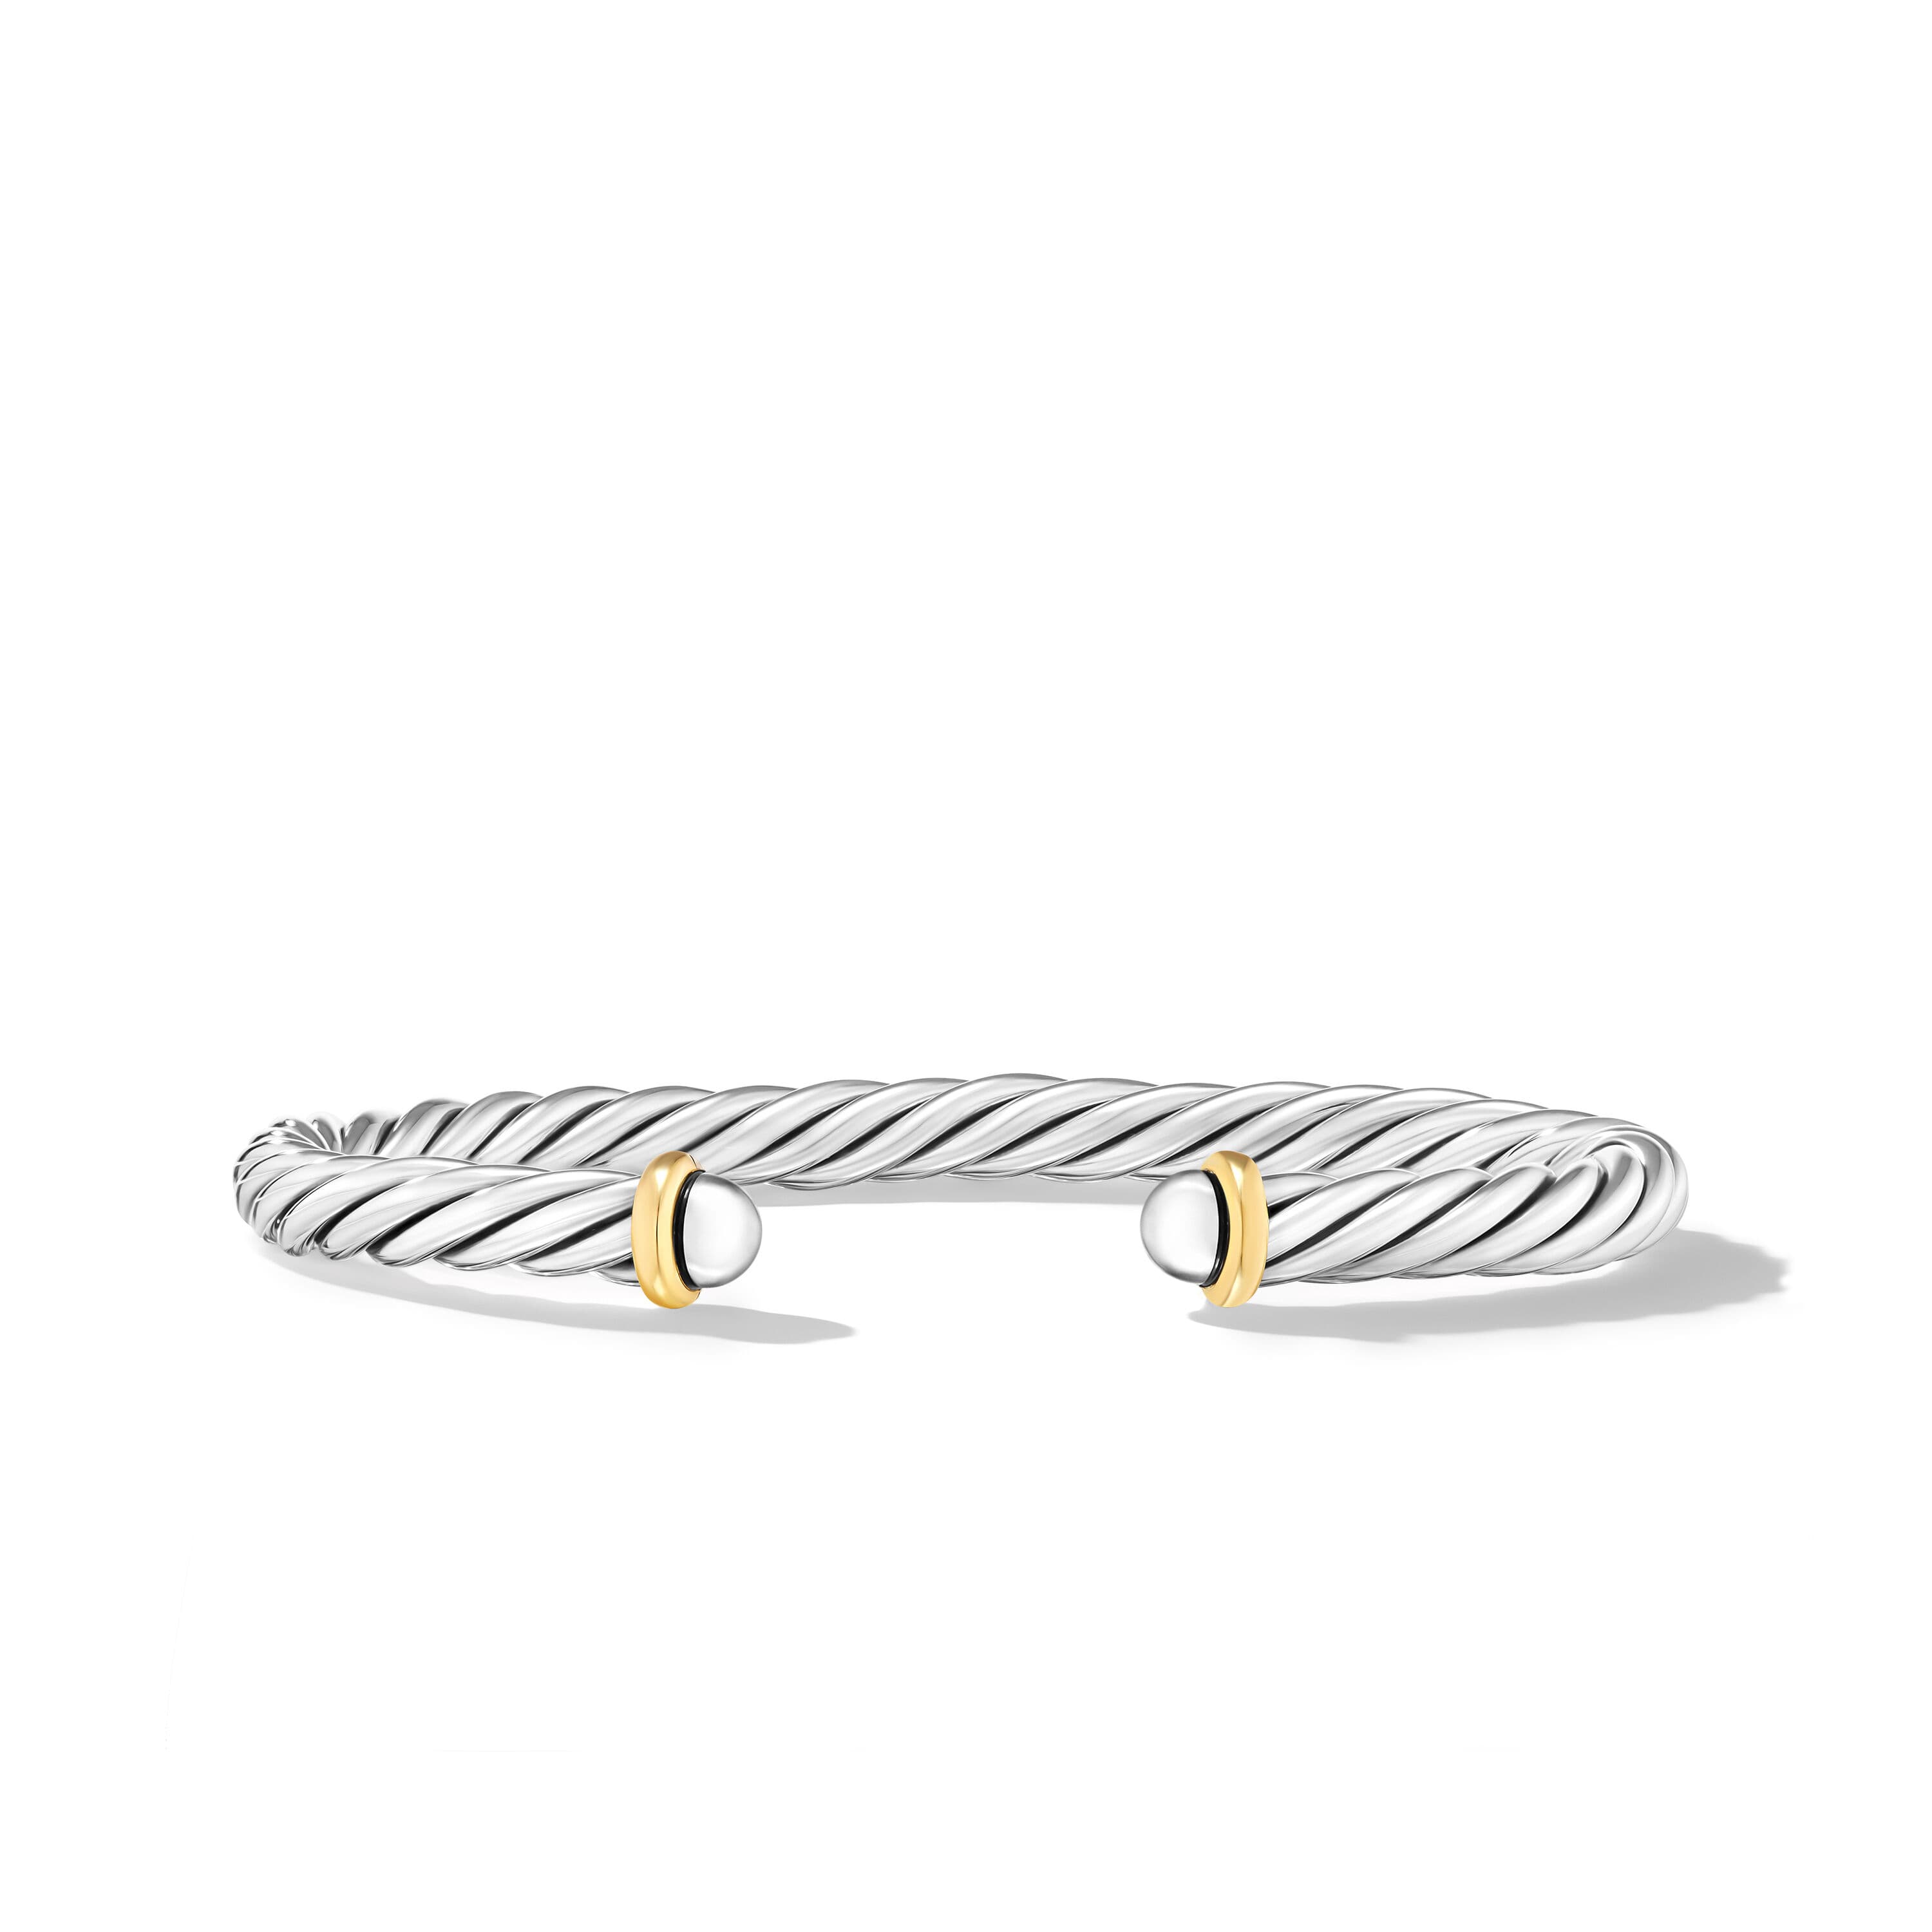 David Yurman 6mm Cable Cuff Bracelet in Sterling Silver with 14K Yellow Gold, Medium